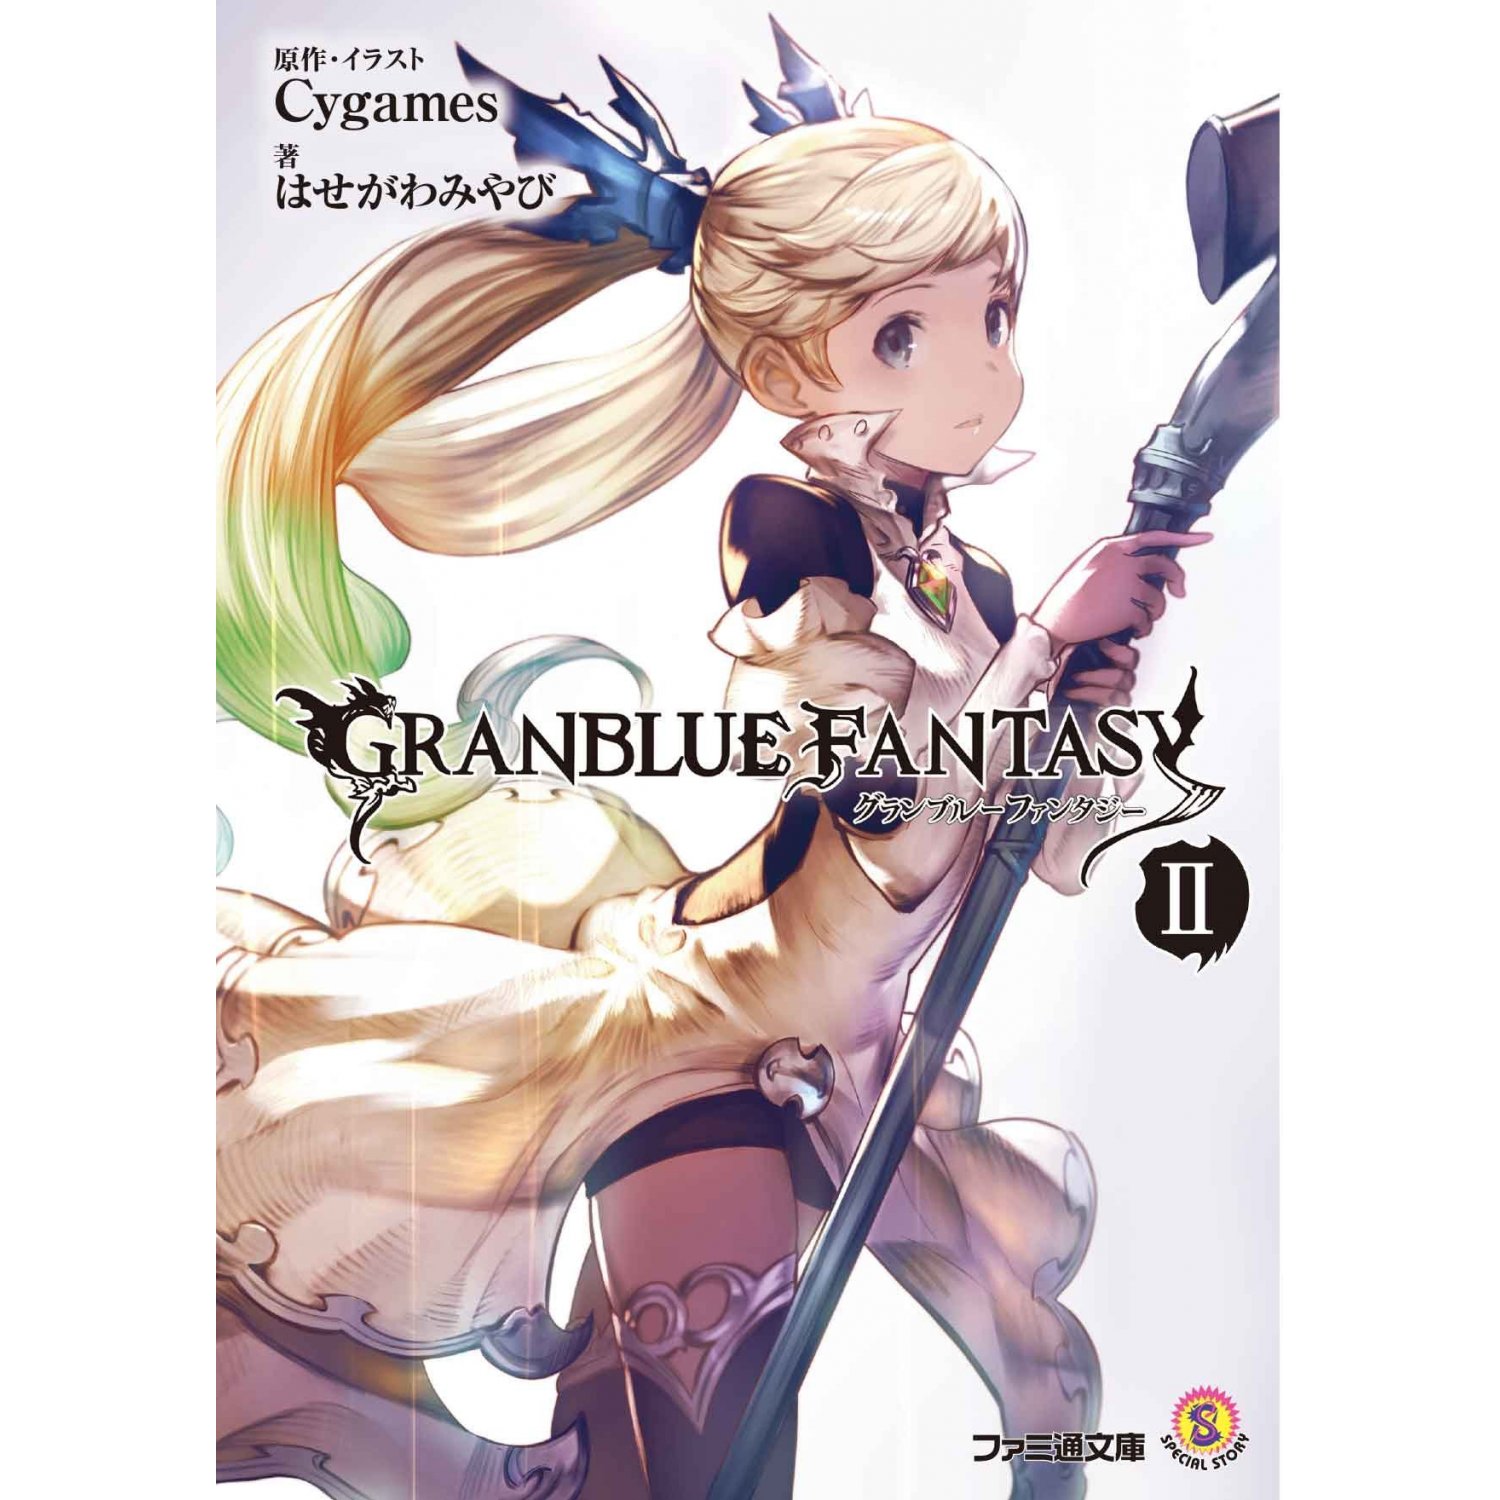 Grand Blue Fantasy Pics, Video Game Collection